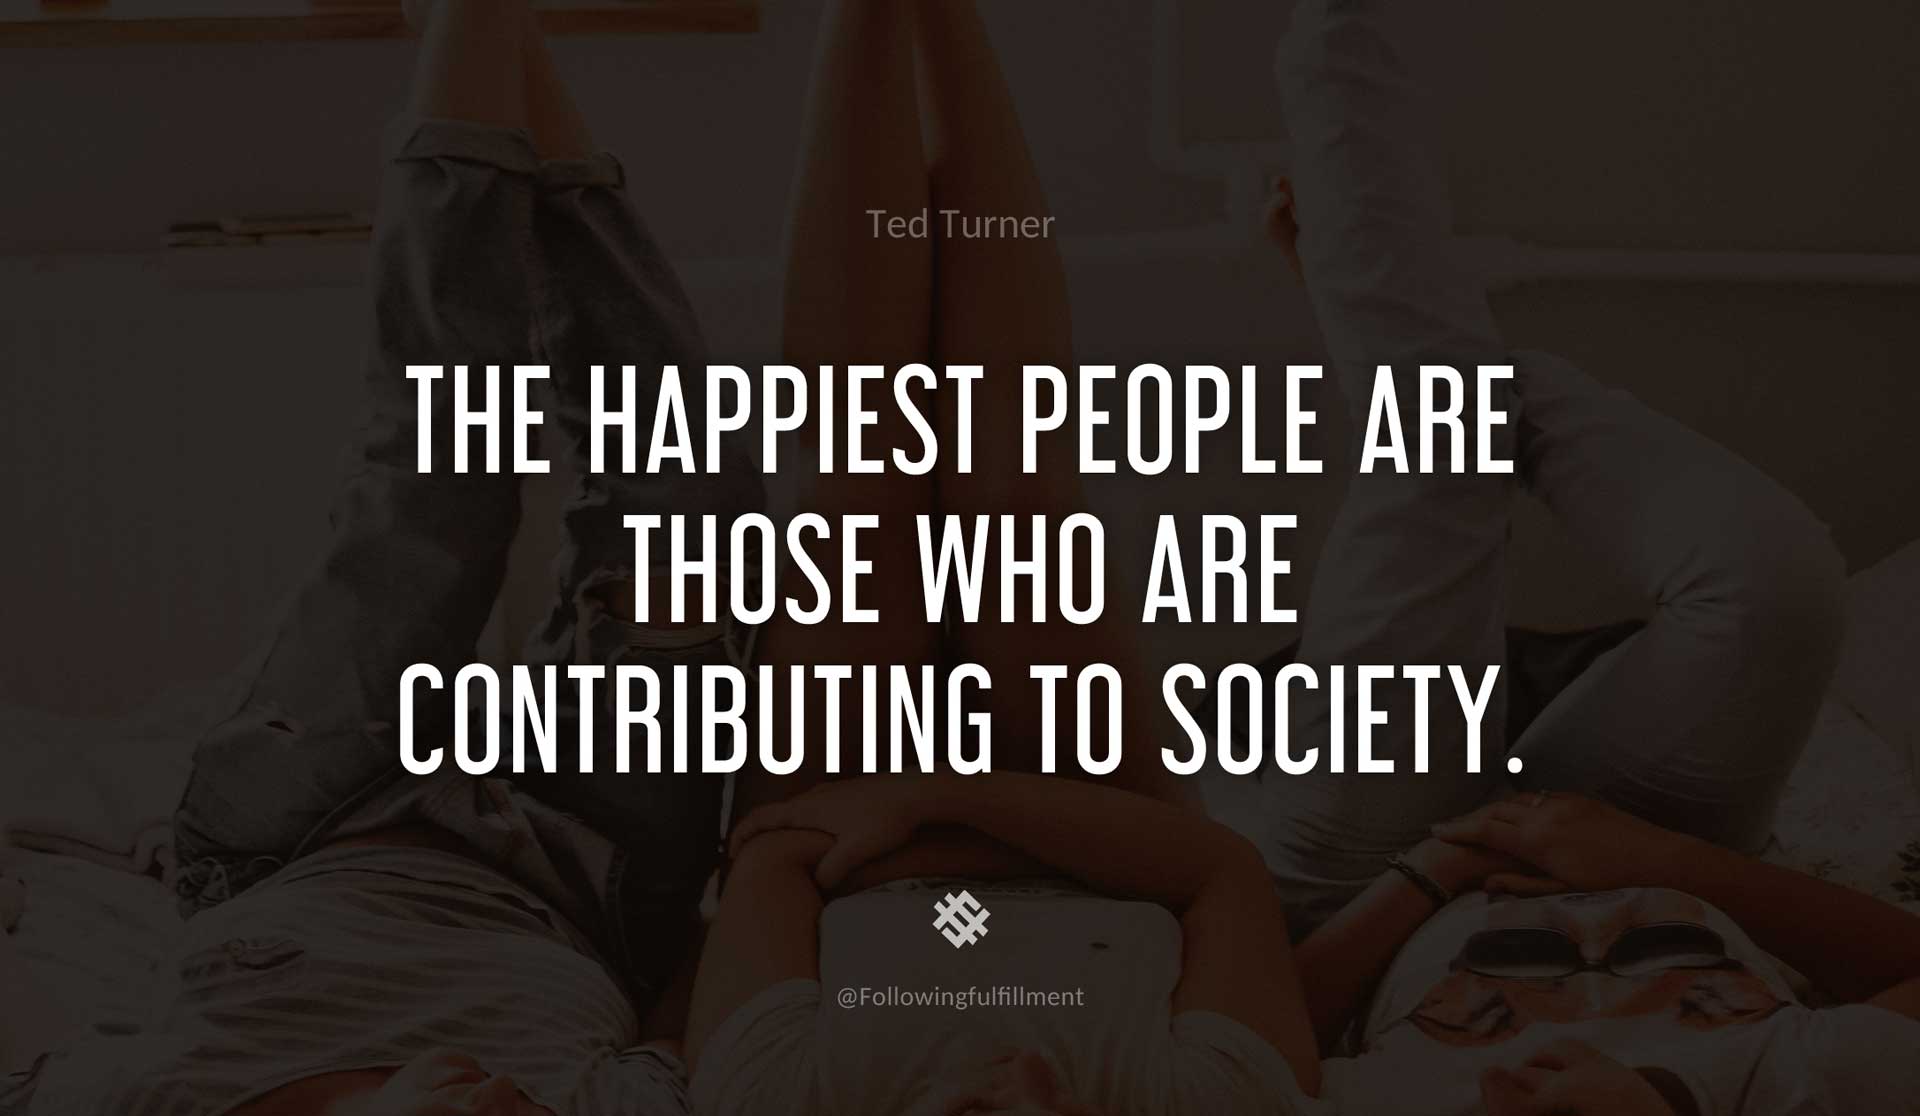 The-happiest-people-are-those-who-are-contributing-to-society.-TED-TURNER-Quote.jpg